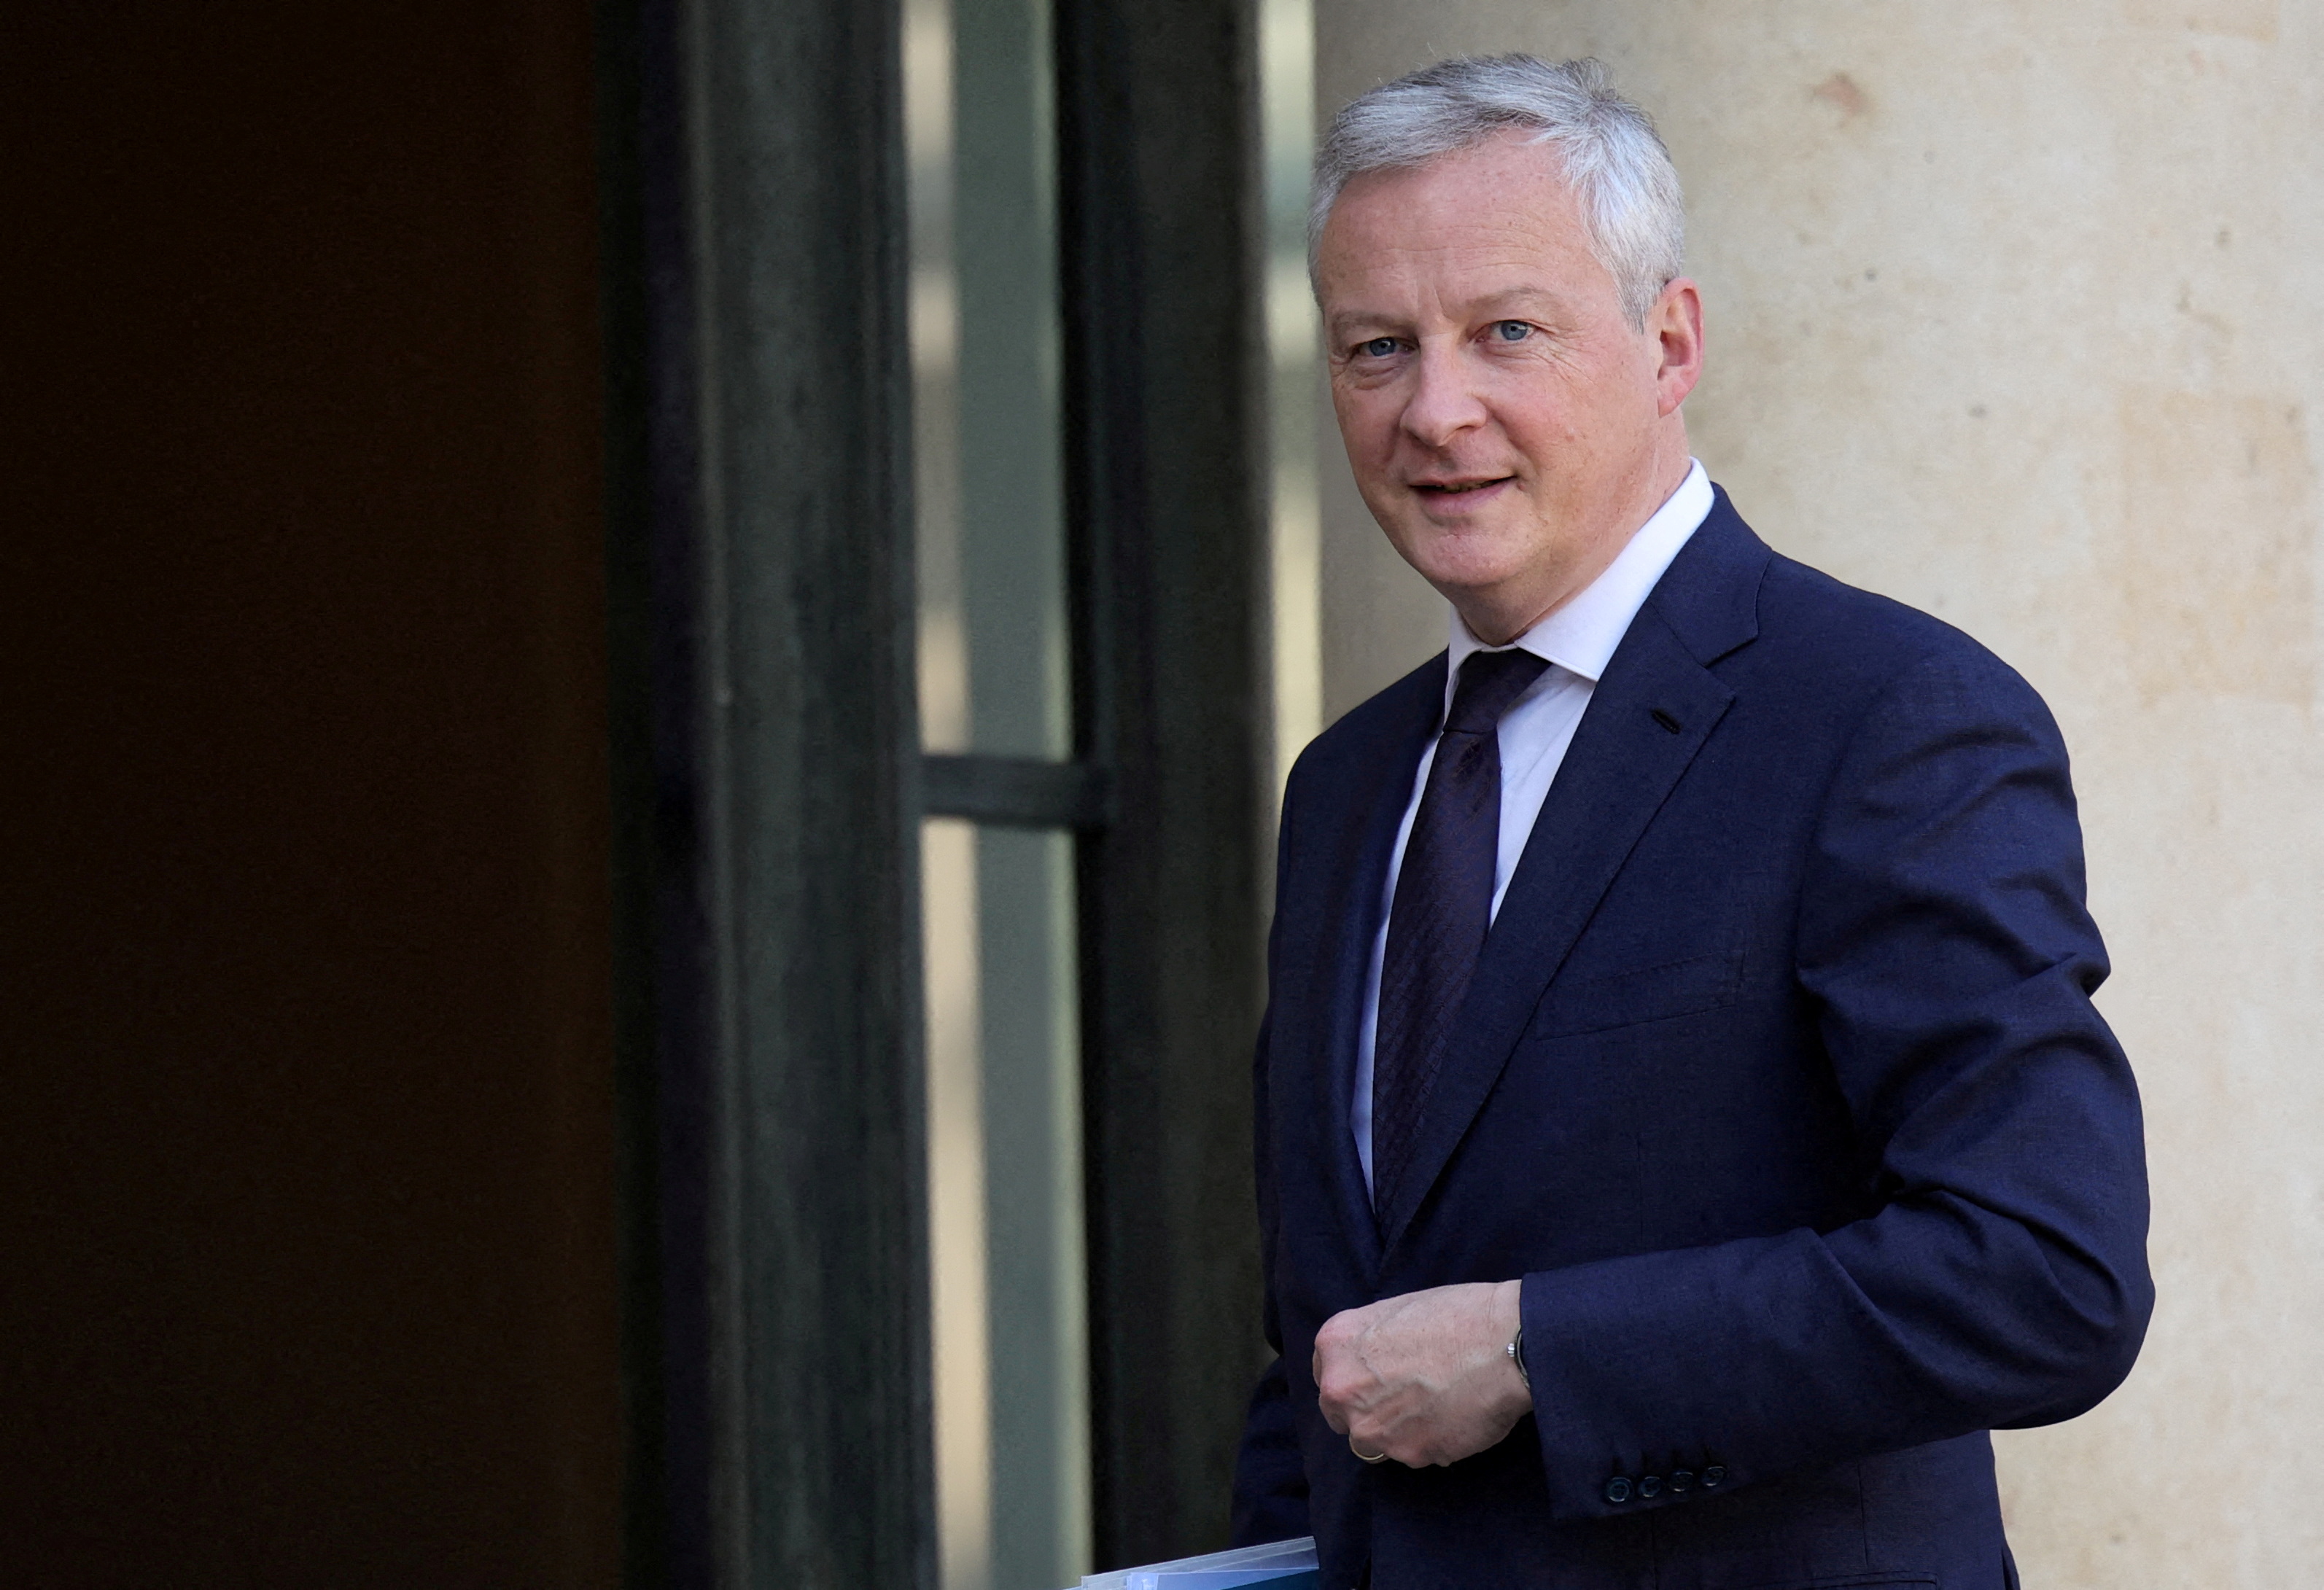 French Economy and Finance Minister Le Maire arrives at the Elysee Palace in Paris